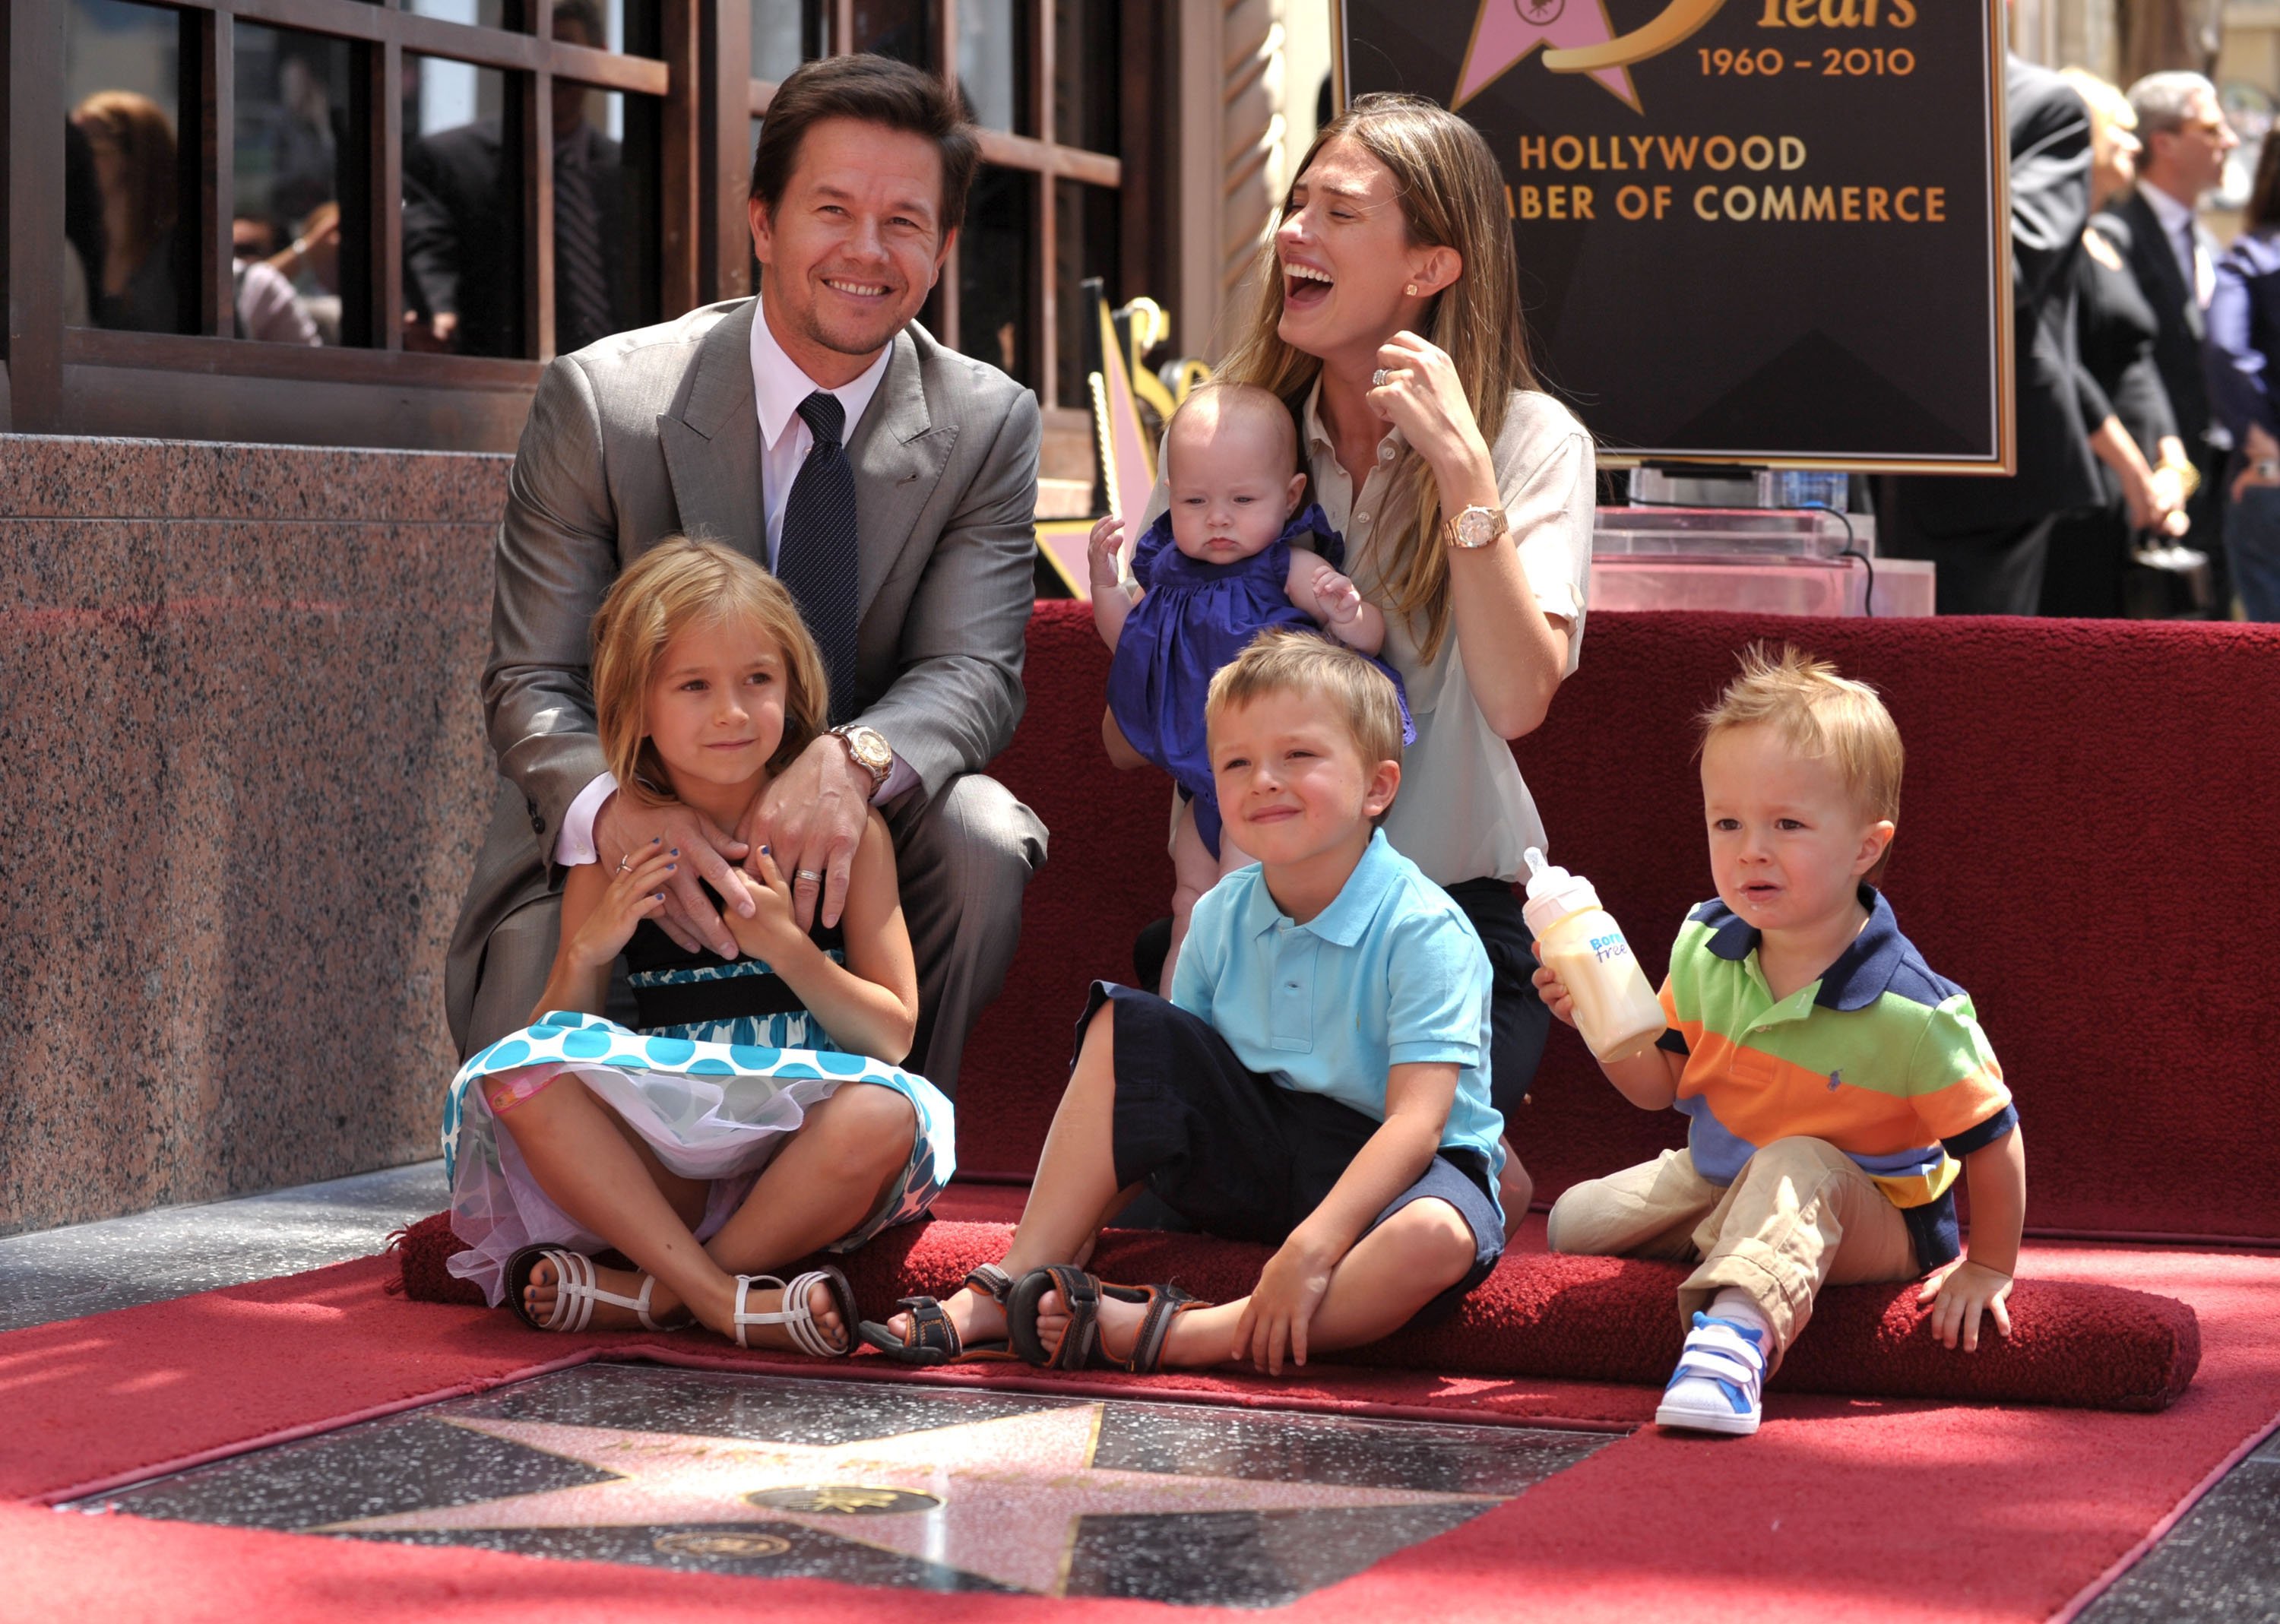 Mark Wahlberg and wife Rhea Durham with their children Ella, Michael, Brendan, and Grace attend Wahlberg's Hollywood Walk of Fame Star Cermony on July 29, 2010 in Hollywood, California | Source: Getty Images